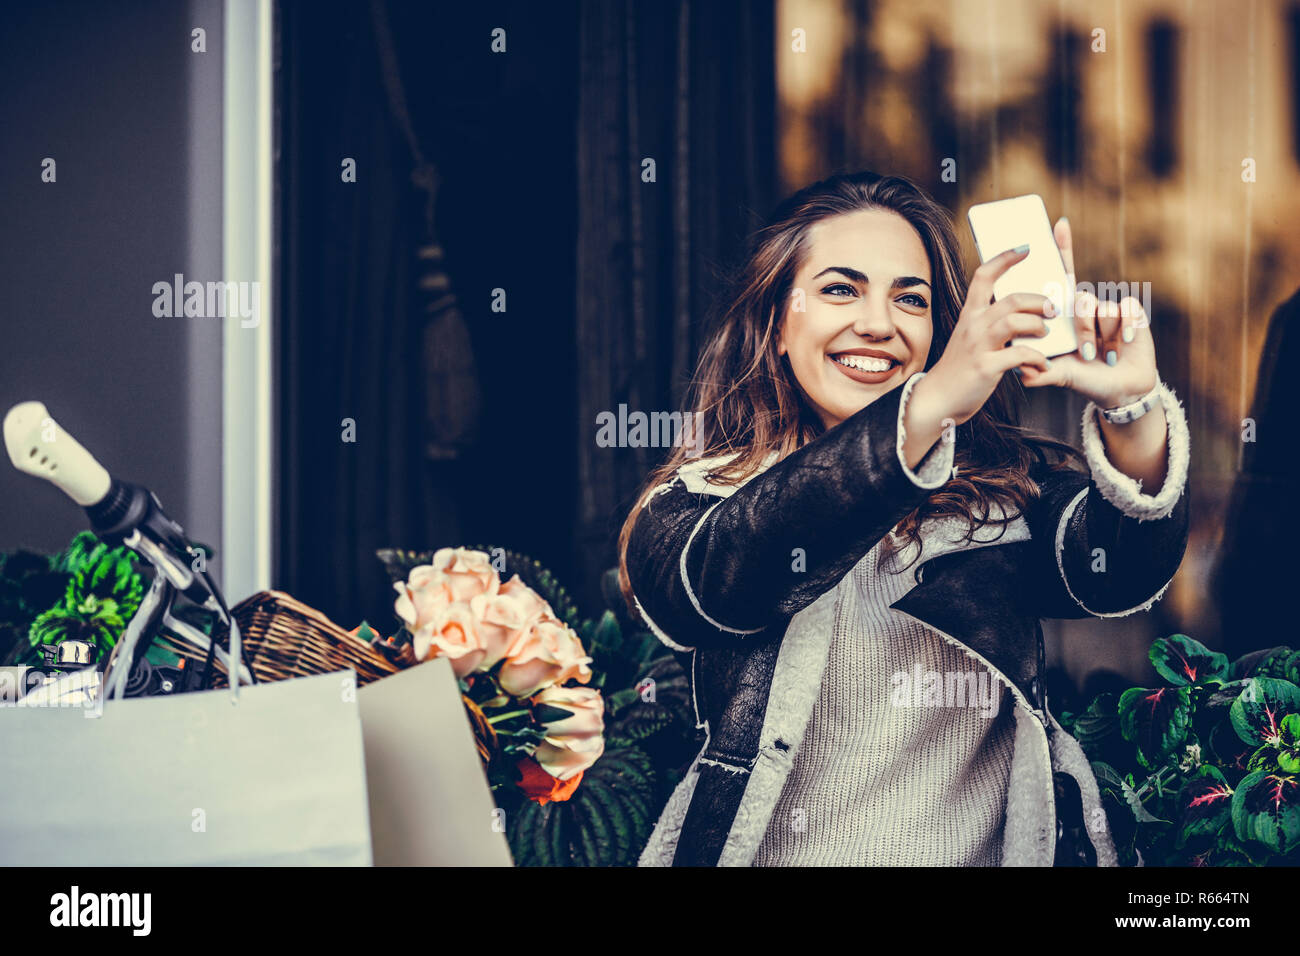 Smiling young woman making selfie photo on smartphone, afrer shopping Stock Photo